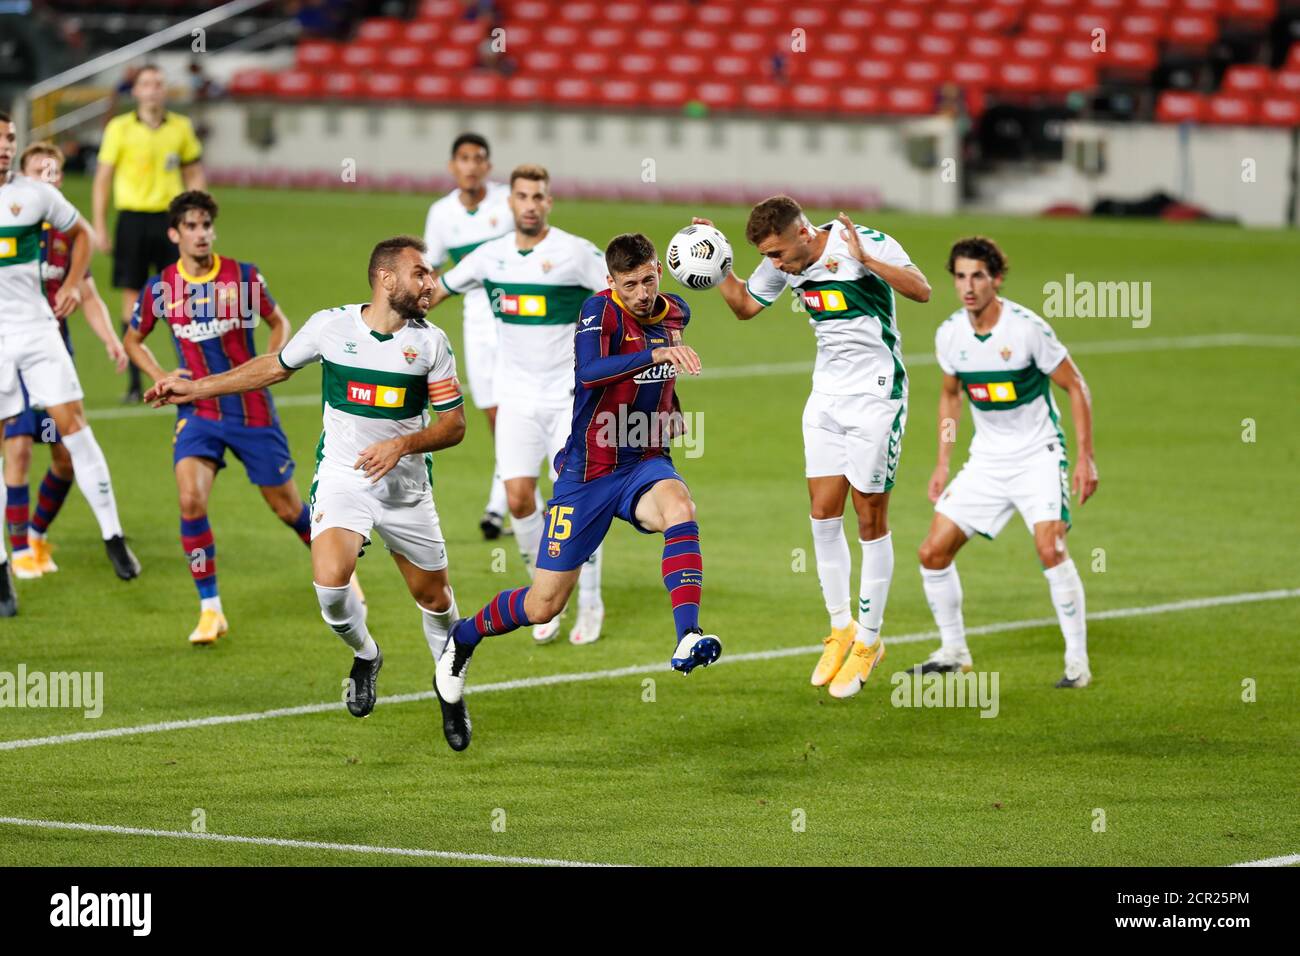 Barcelona, Barcelona, Spain. 19th Sep, 2020. Lenglet during the Gamper Trophy match between FC Barcelona and Elche at Camp Nou on September 19, 2020 in Barcelona, Spain. Credit: David Ramirez/DAX/ZUMA Wire/Alamy Live News Stock Photo